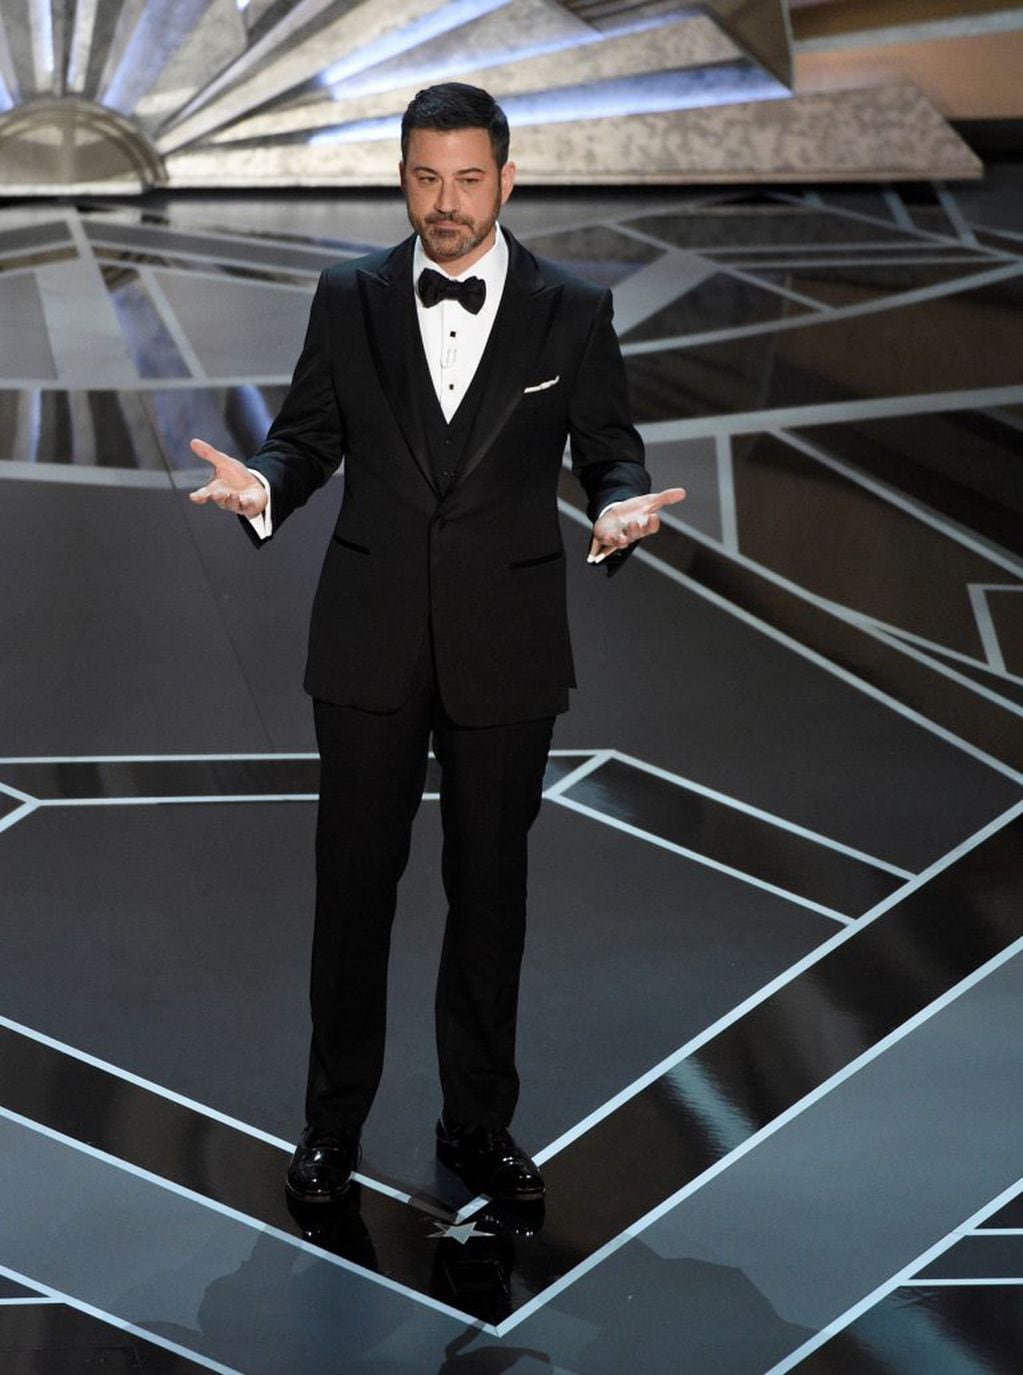 Host Jimmy Kimmel speaks at the Oscars on Sunday, March 4, 2018, at the Dolby Theatre in Los Angeles. (Photo by Chris Pizzello/Invision/AP)